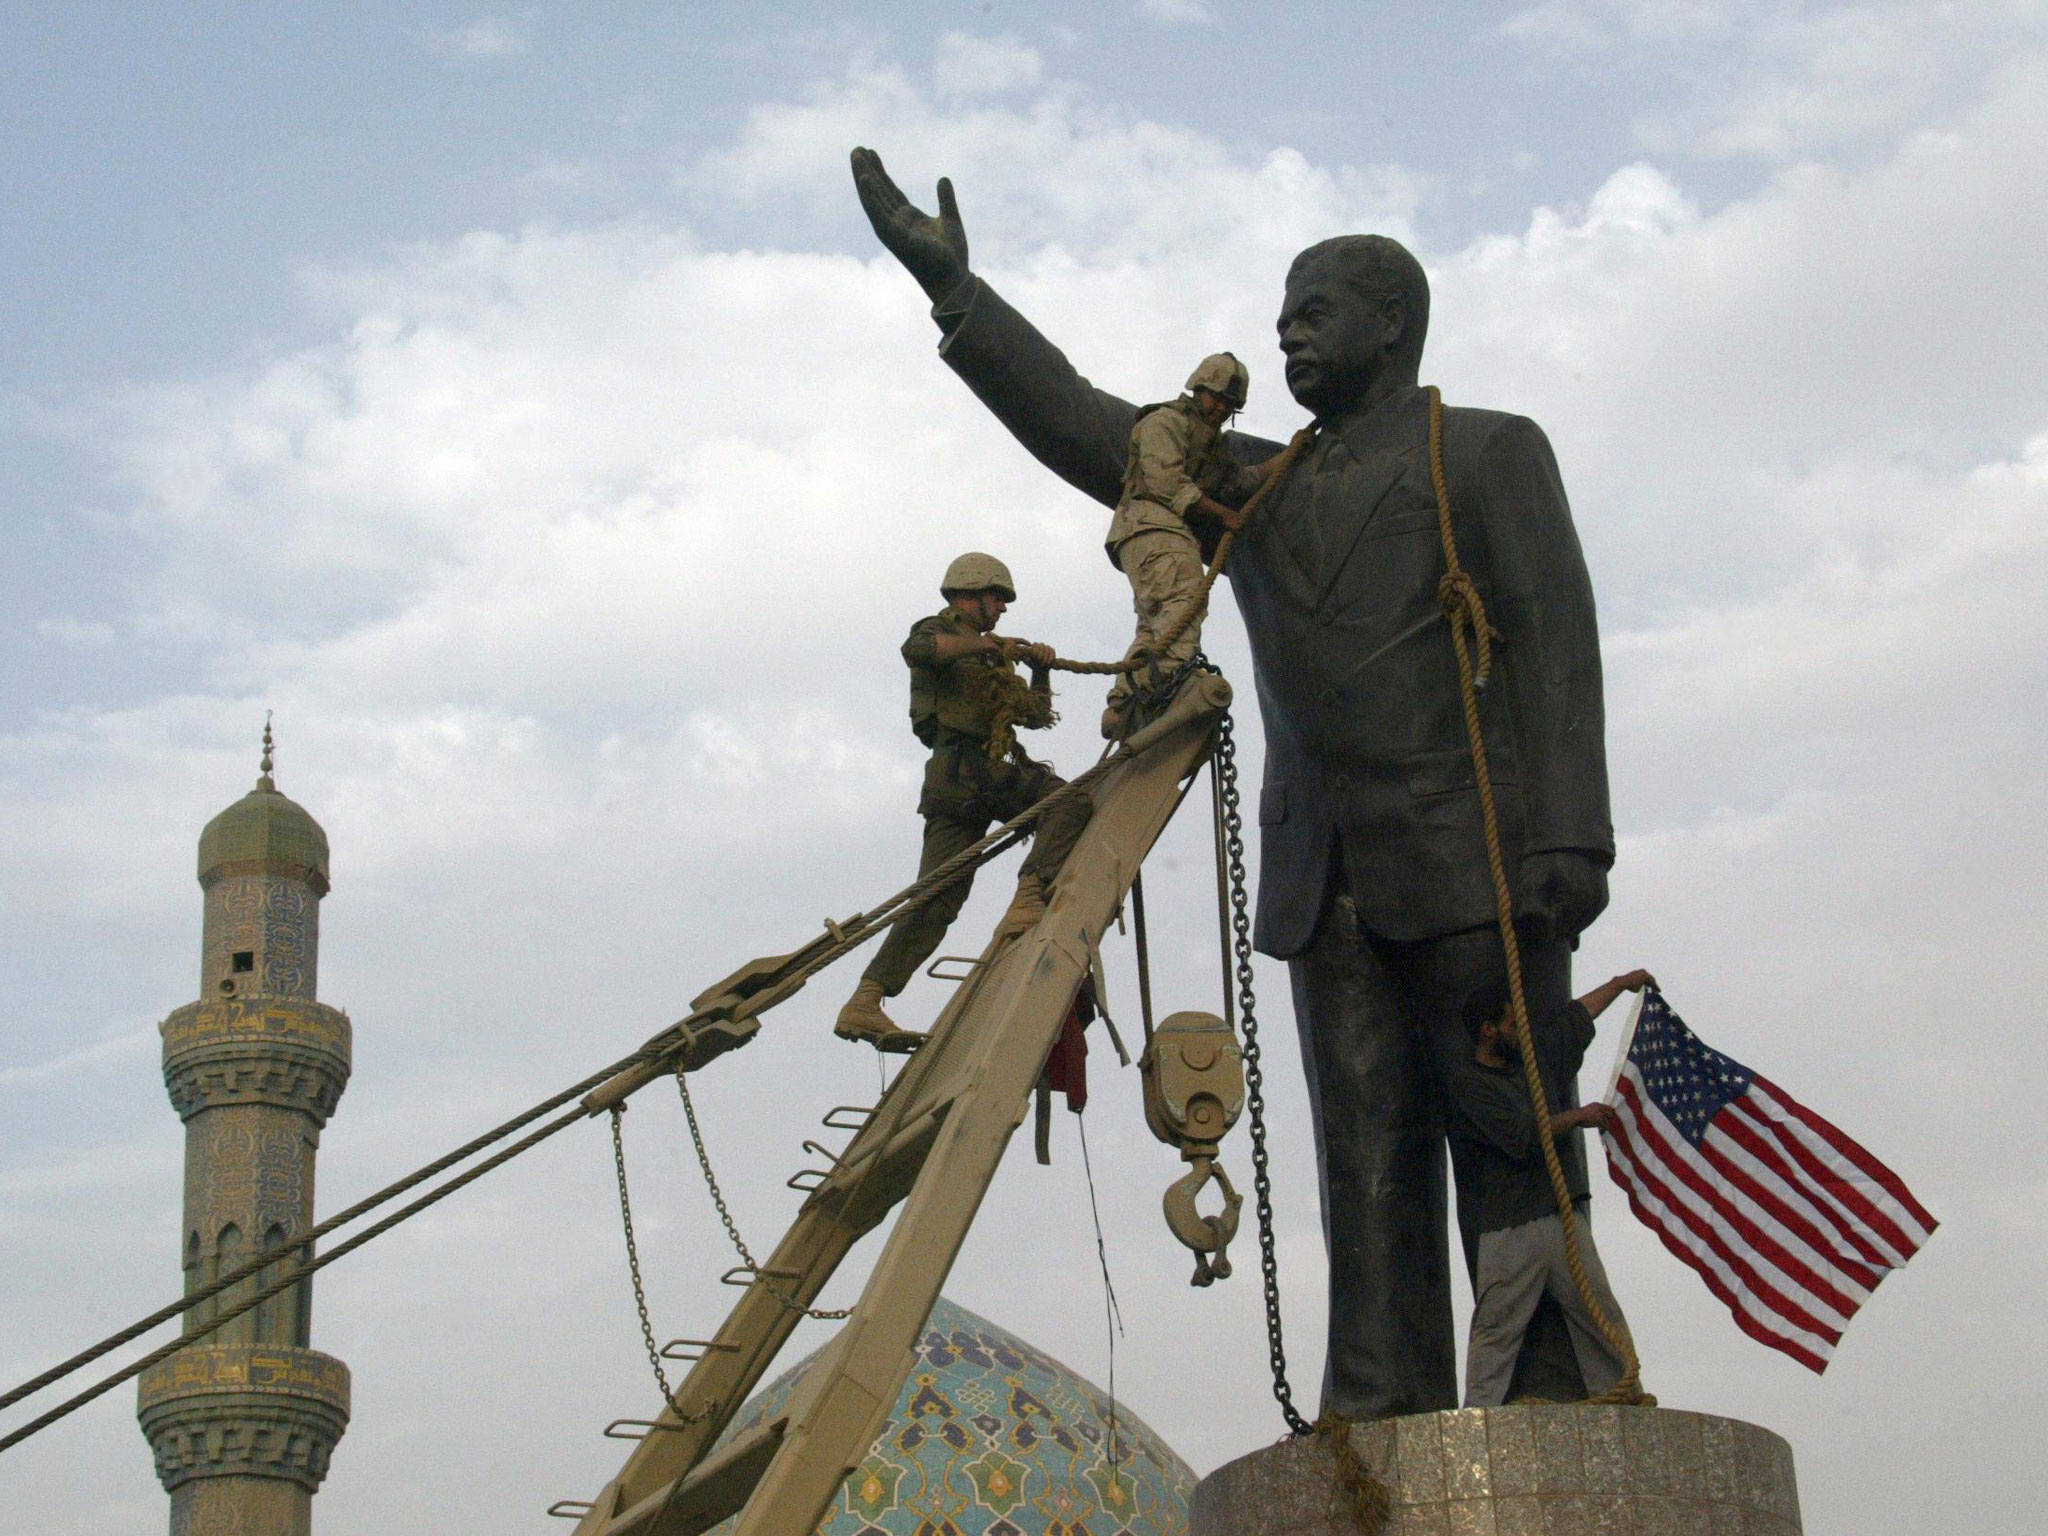 US troops chaining a statue of Saddam Hussein before pulling it down. Credit: Ramzi Haidar/AFP